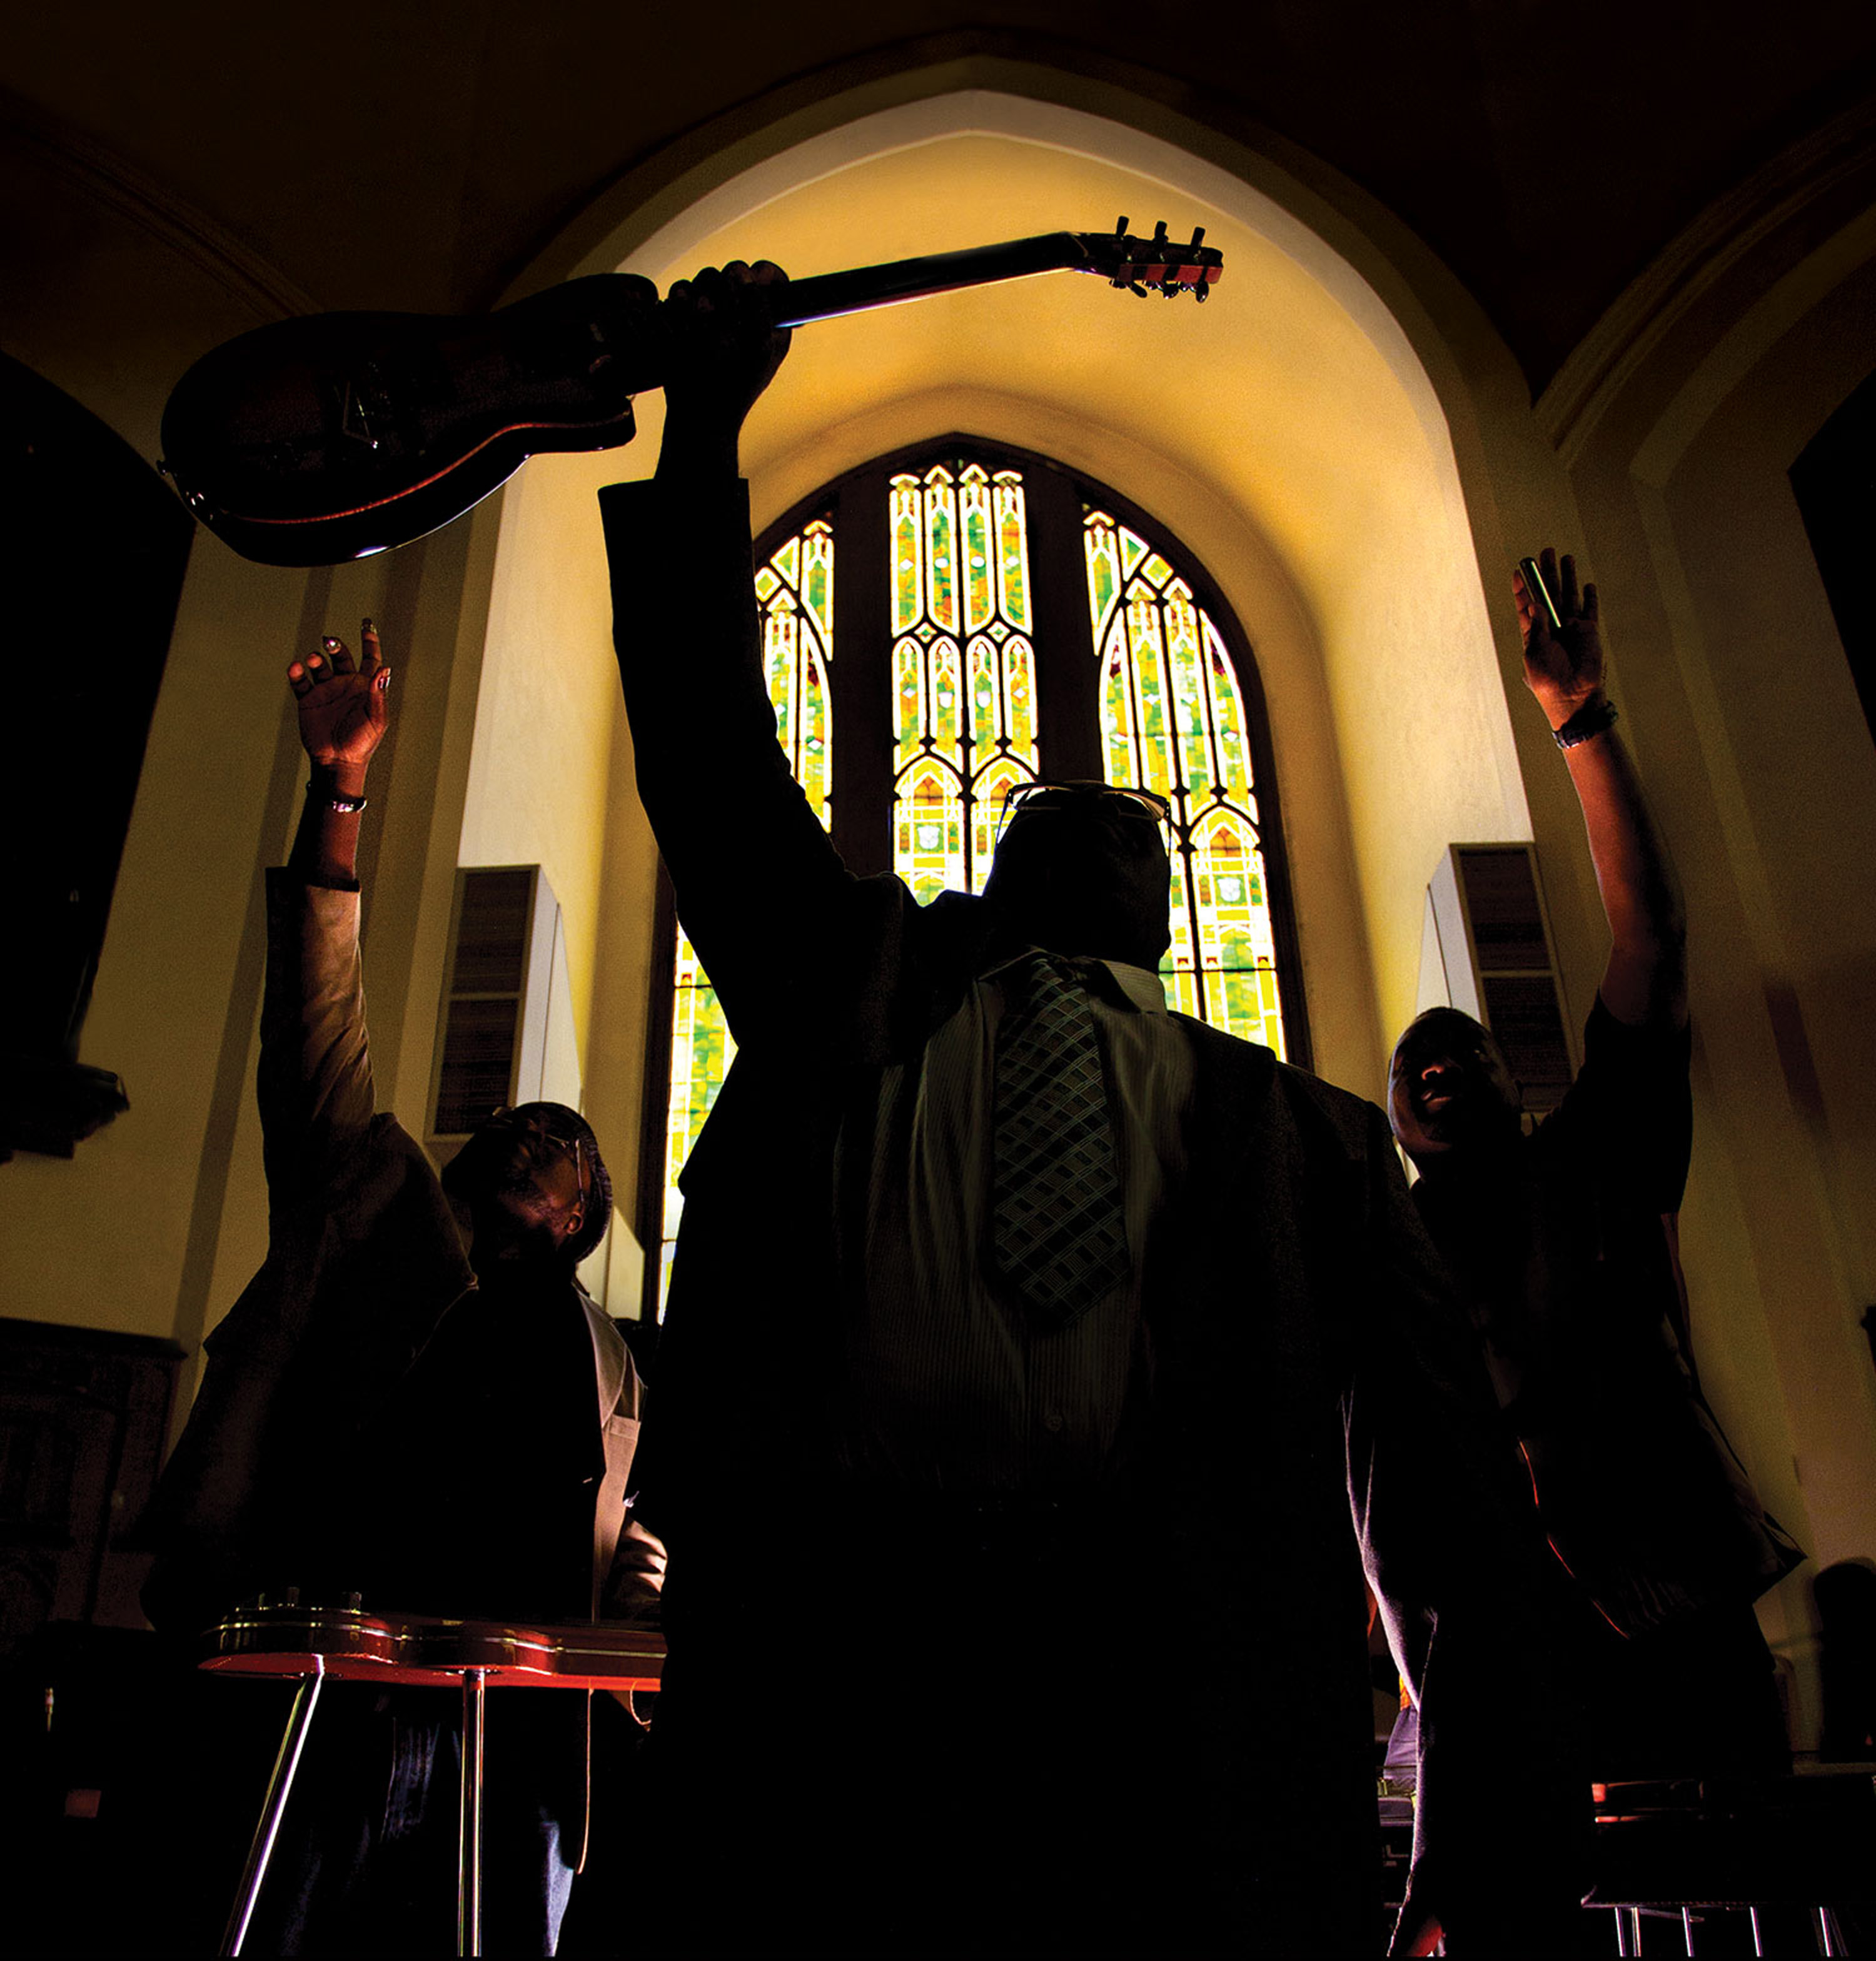 The Campbell Brothers raise their hands to the ceiling in a church